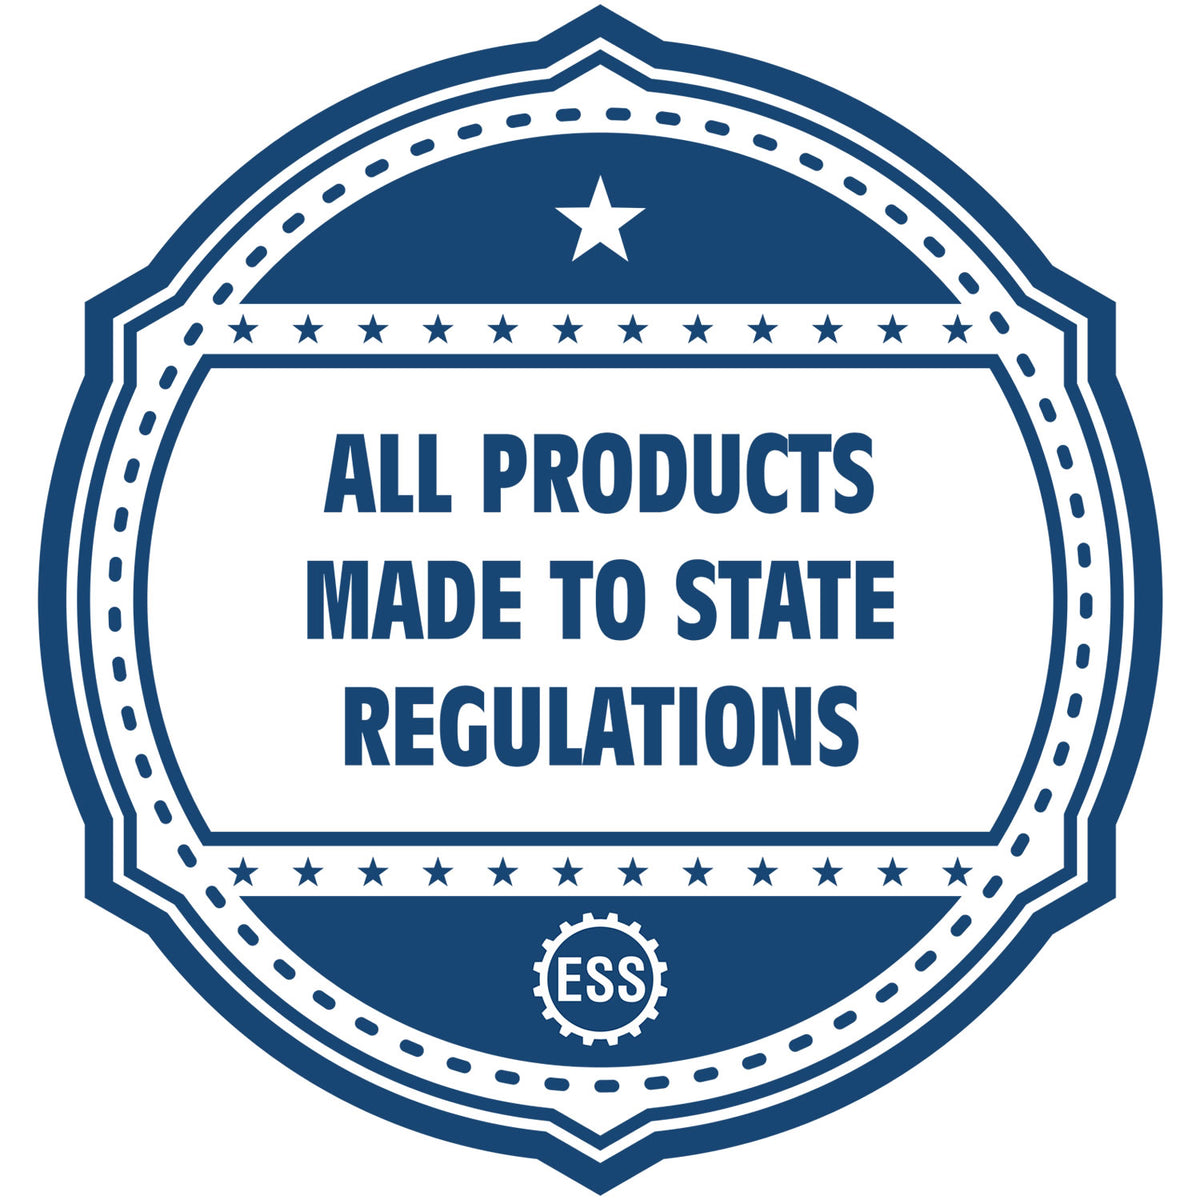 An icon or badge element for the Digital Montana Landscape Architect Stamp showing that this product is made in compliance with state regulations.